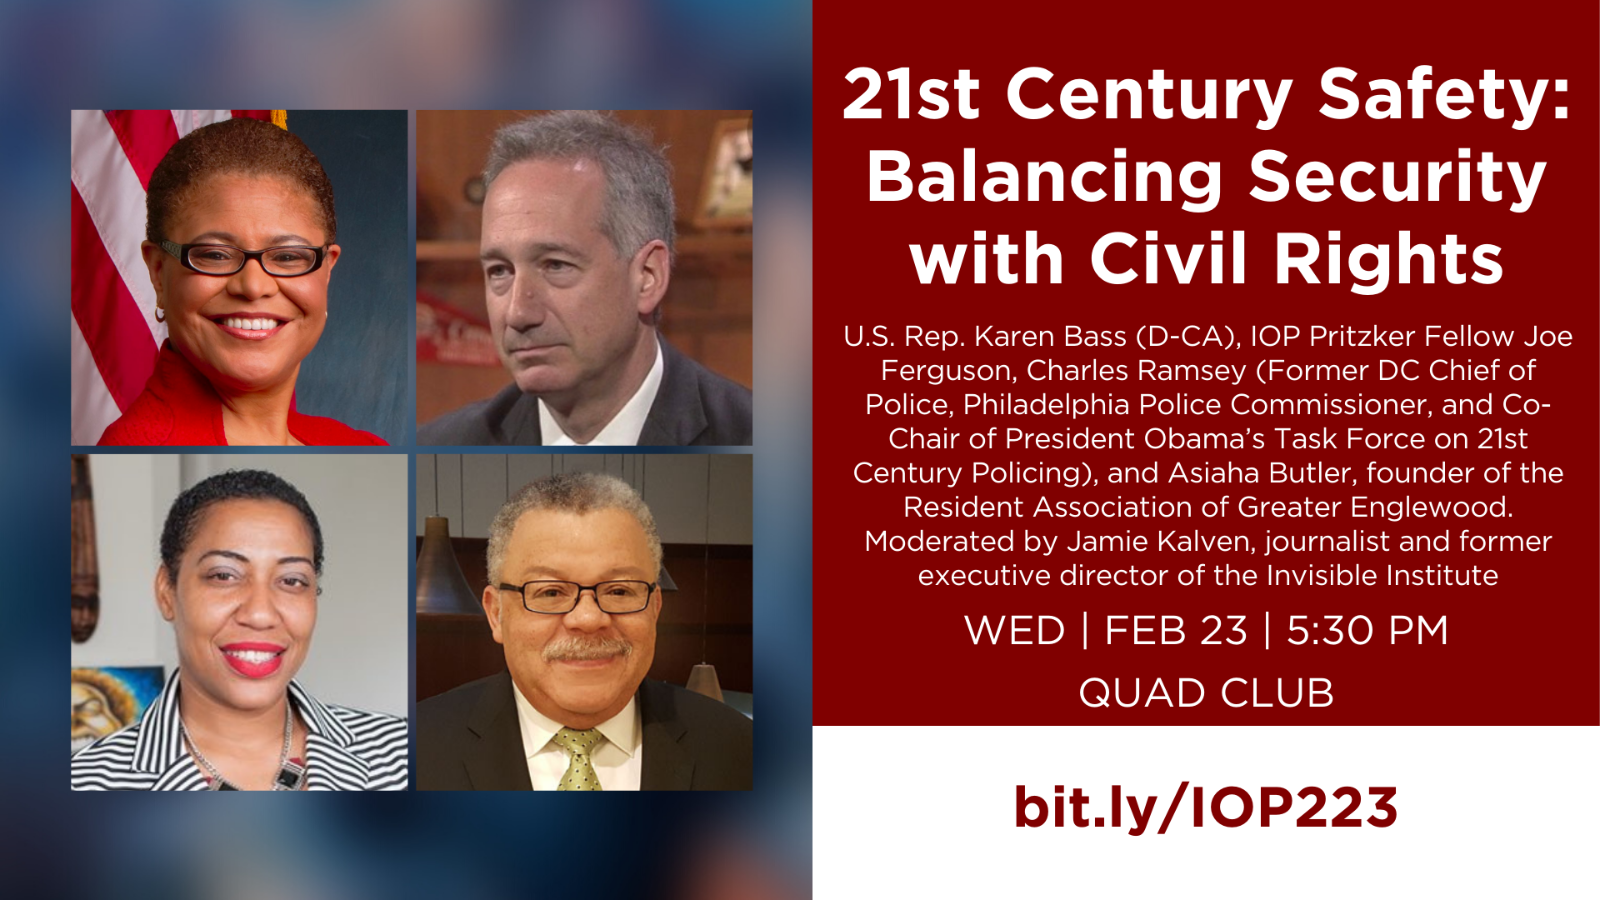 21st Century Safety: Balancing Security with Civil Rights